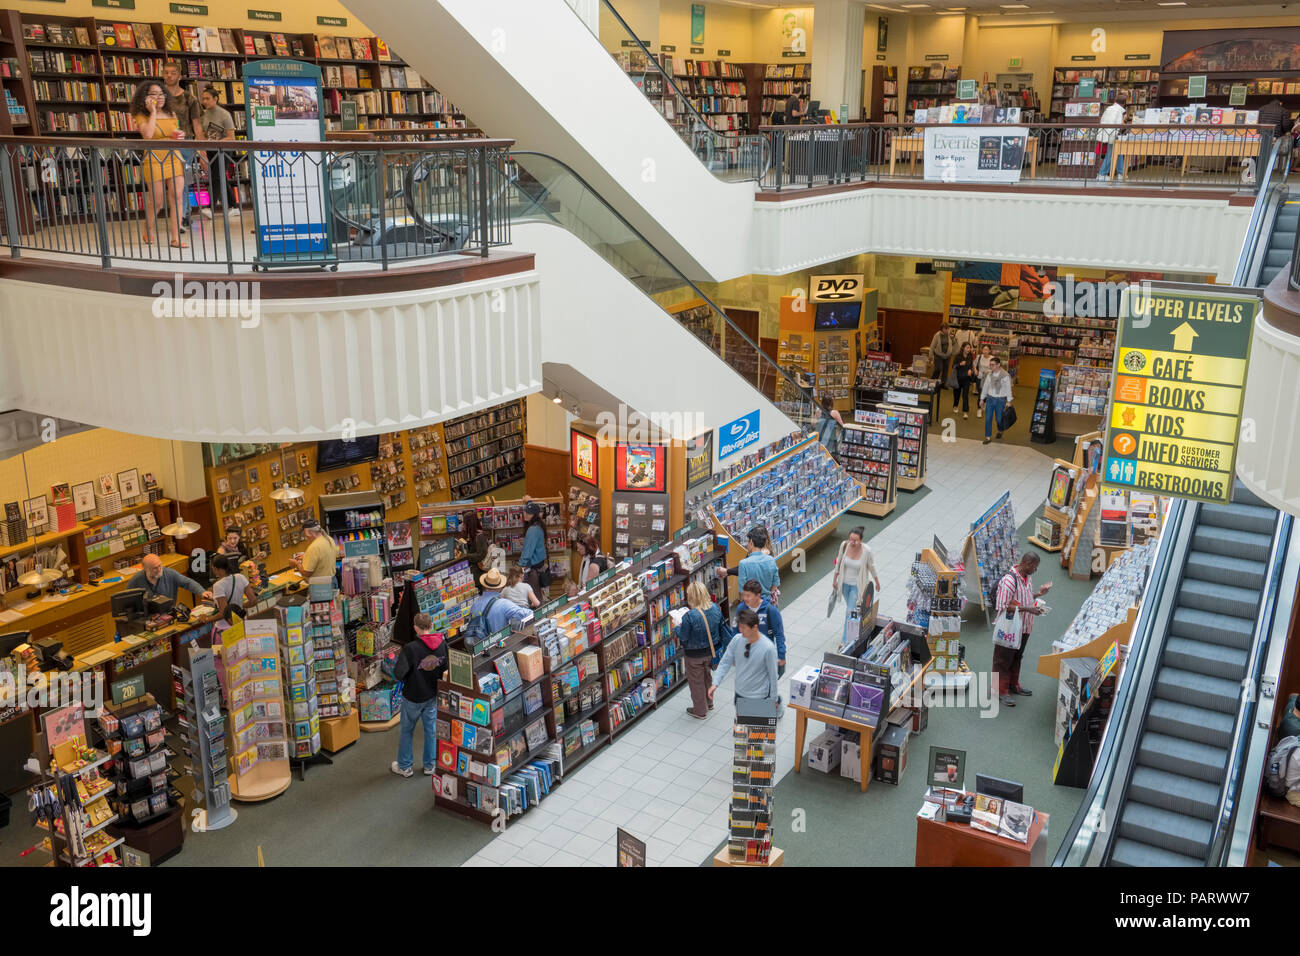 Inside the Barnes & Noble Bookstore in The Grove at the Farmers Market, Los Angeles, California, USA Stock Photo